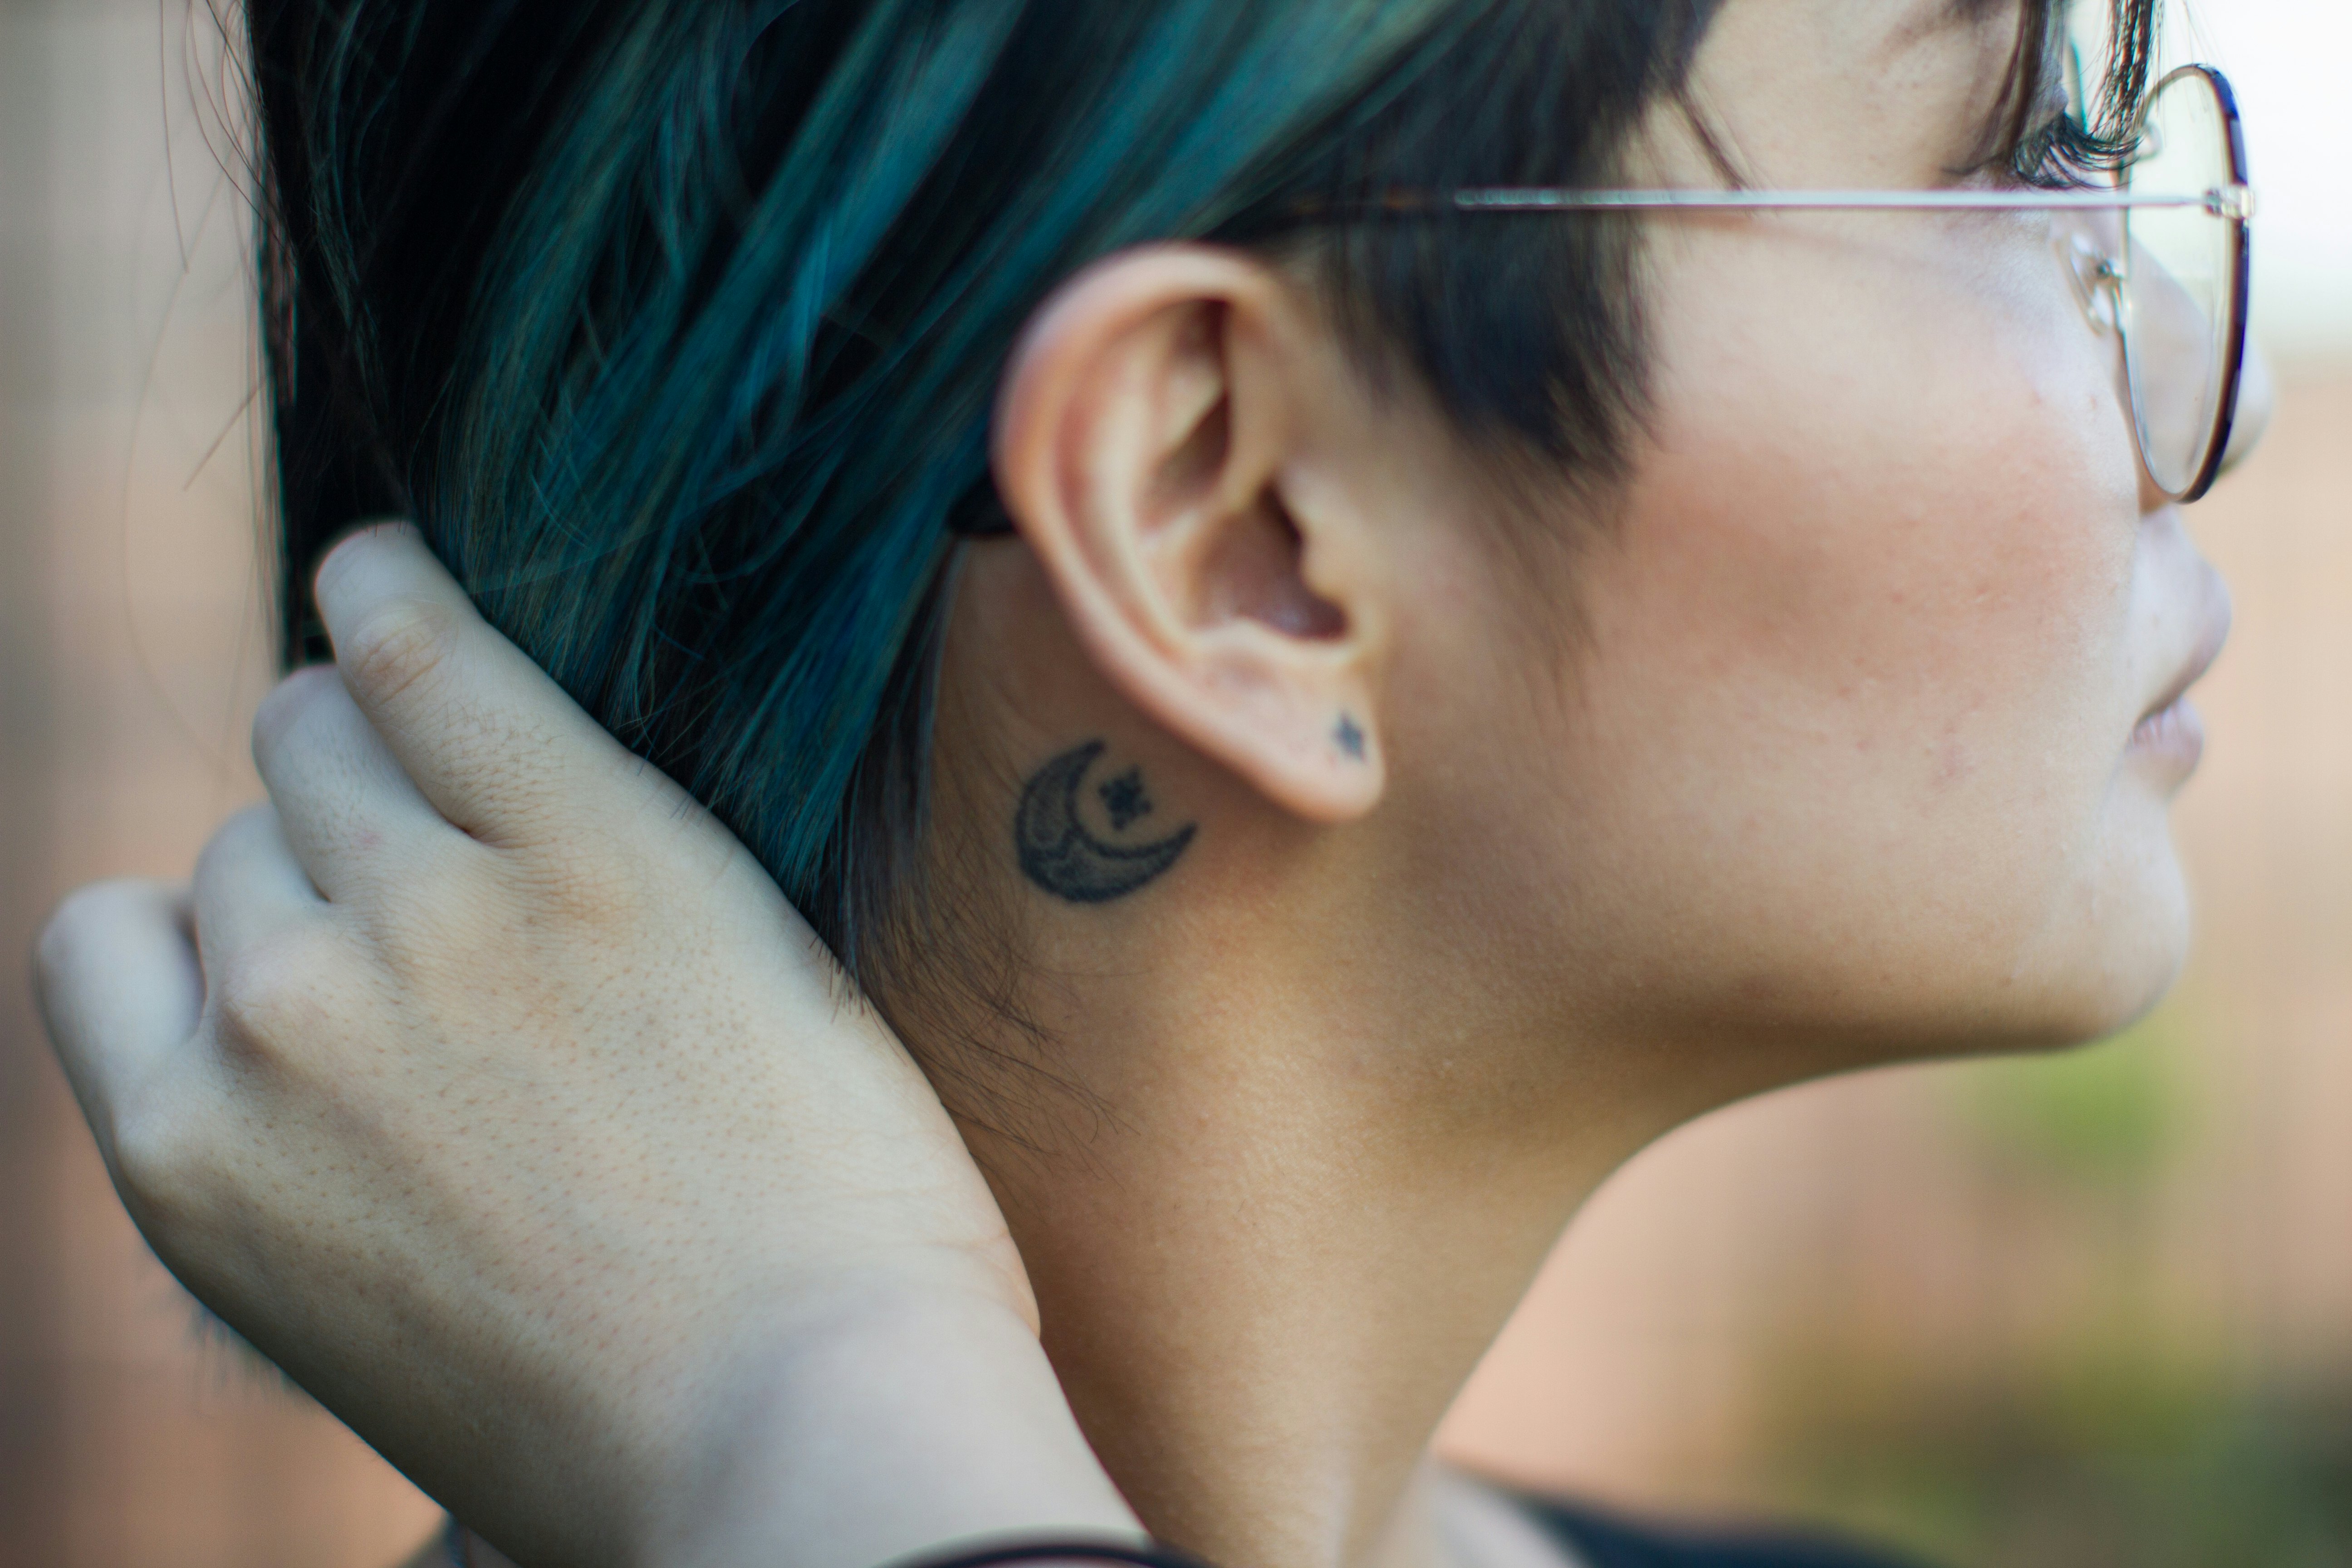 11 Girls Explain How Their Parents Found Out About Their First Tattoo